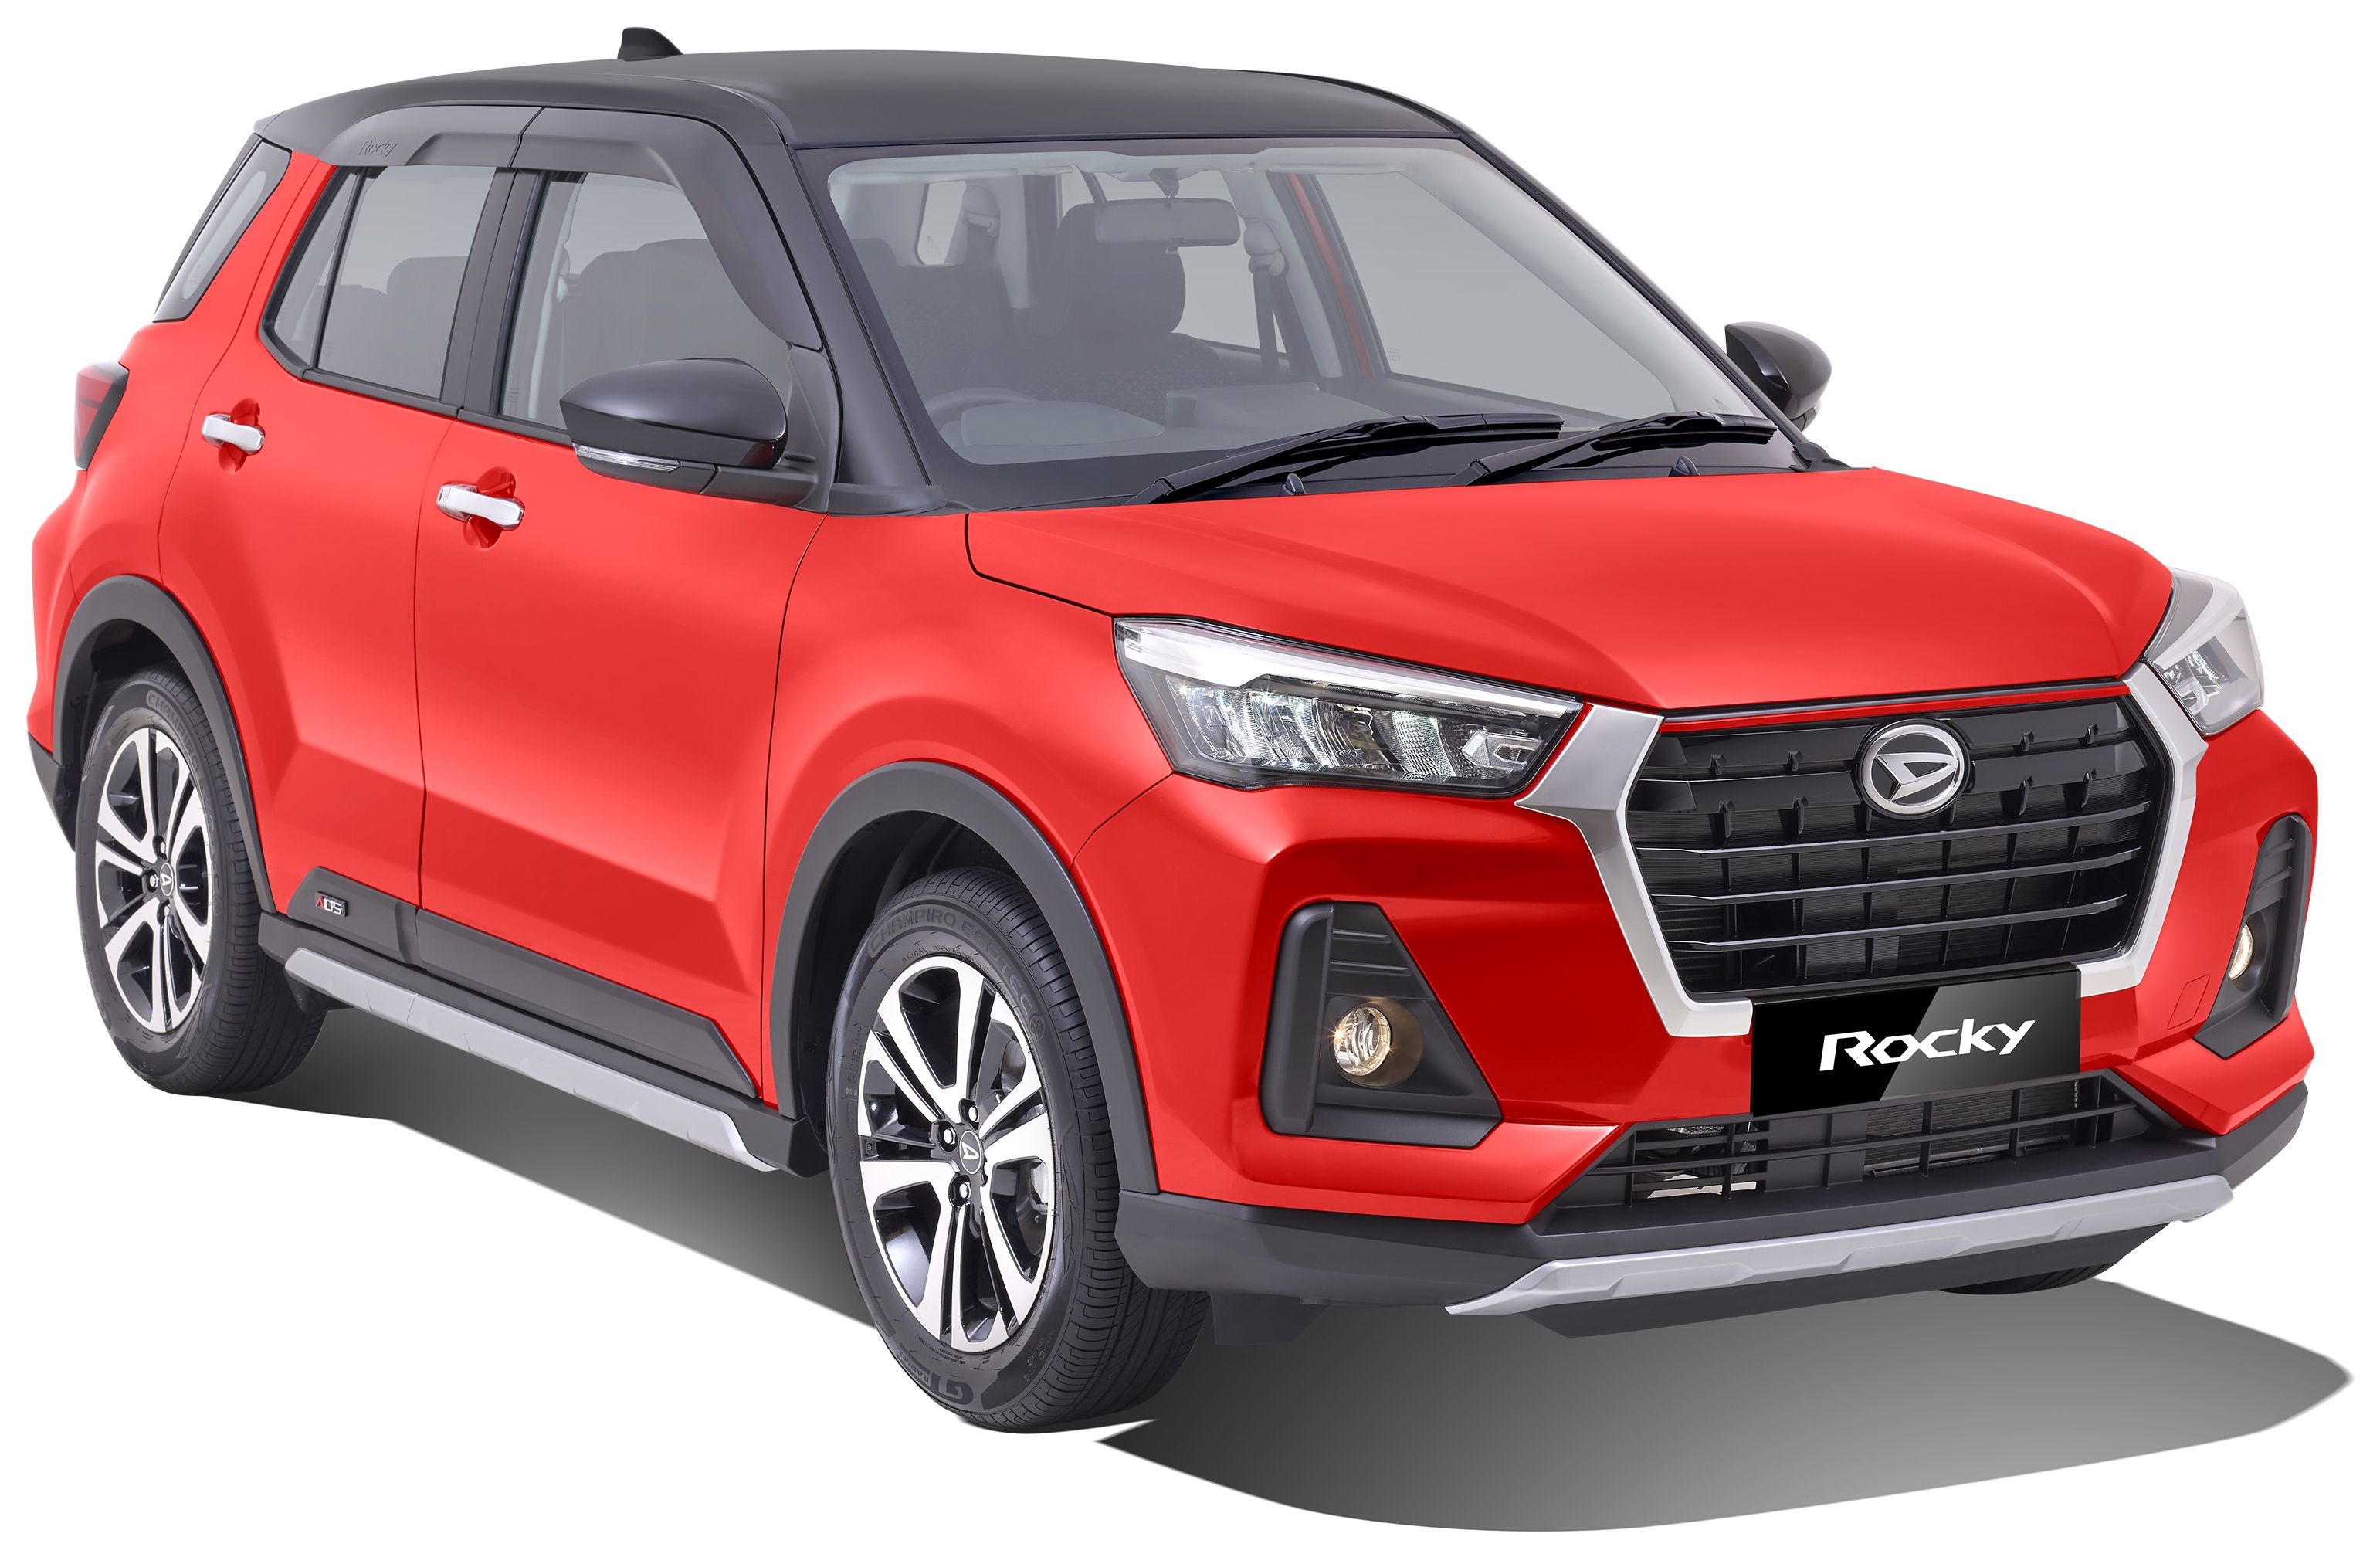 Daihatsu Rocky launched in Indonesia – 1.2L NA and 1.0L turbo, M/T or CVT, ASA available, RM61k to RM67k - paultan.org